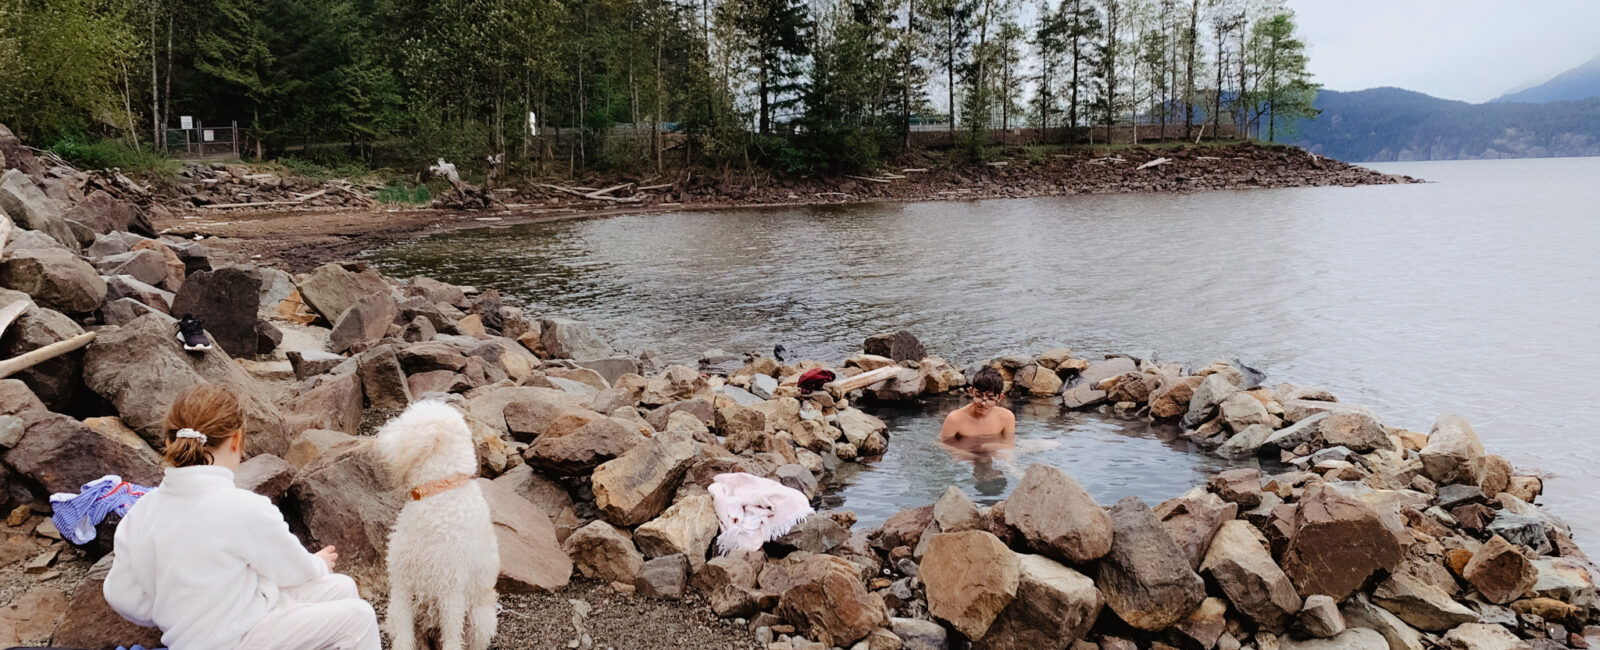 How to find Harrison Hot Springs Outdoor Natural Hot Spring